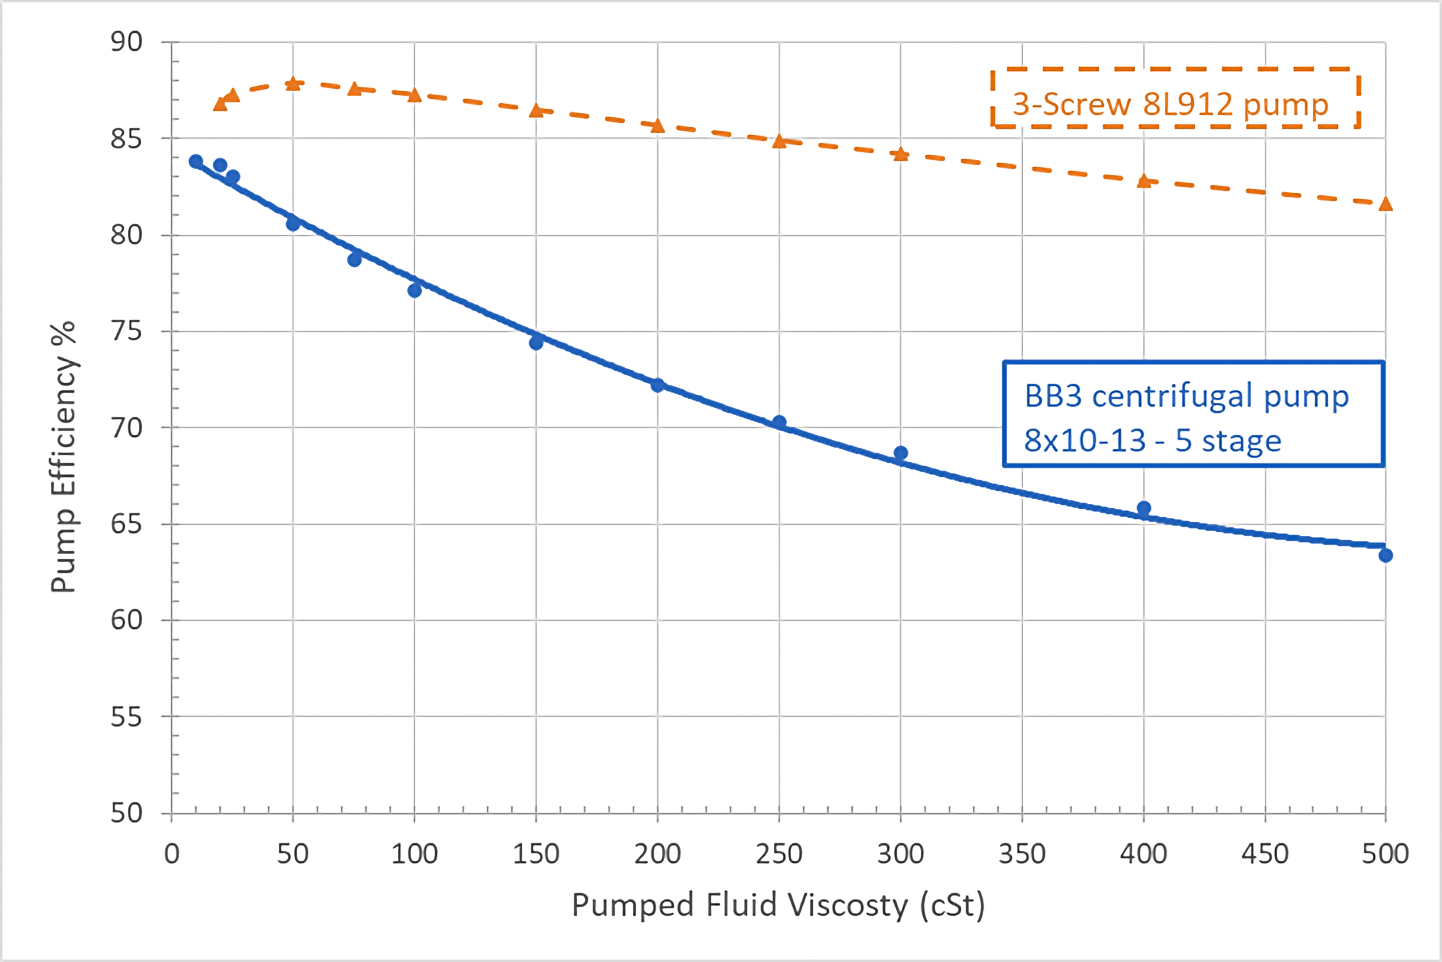 Image 1: Pump efficiency at different viscosities (Images courtesy of CIRCOR)